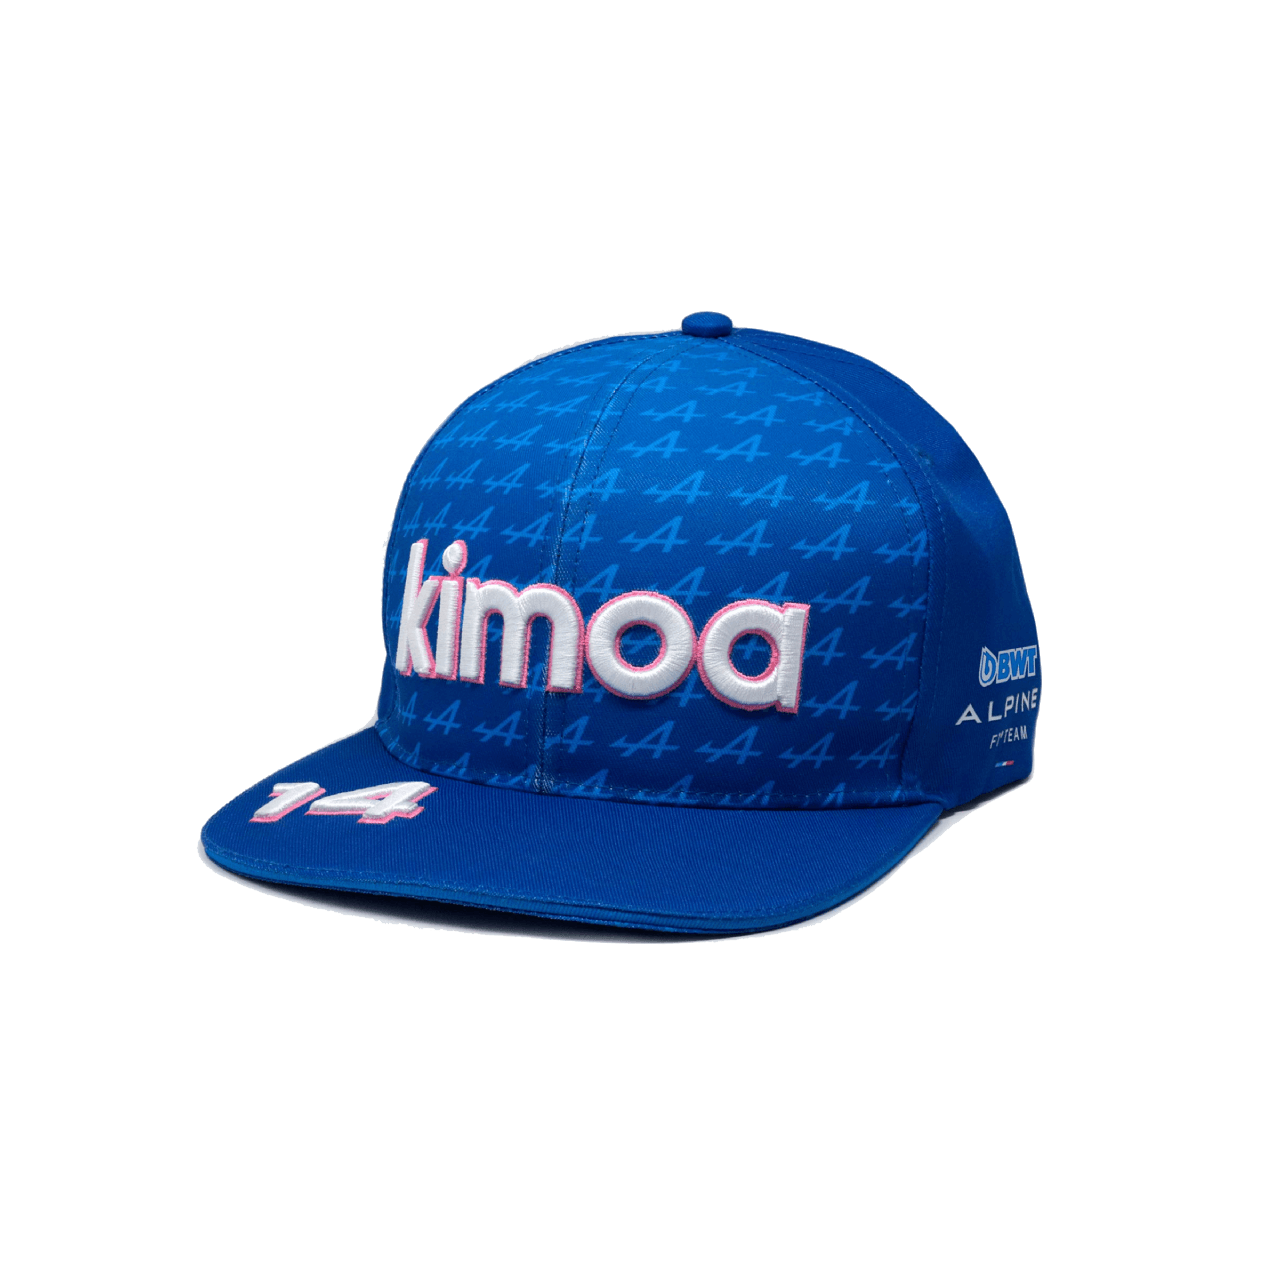 Kimoa BWT ALPINE F1 Snappack Cap blue with white and pink elements